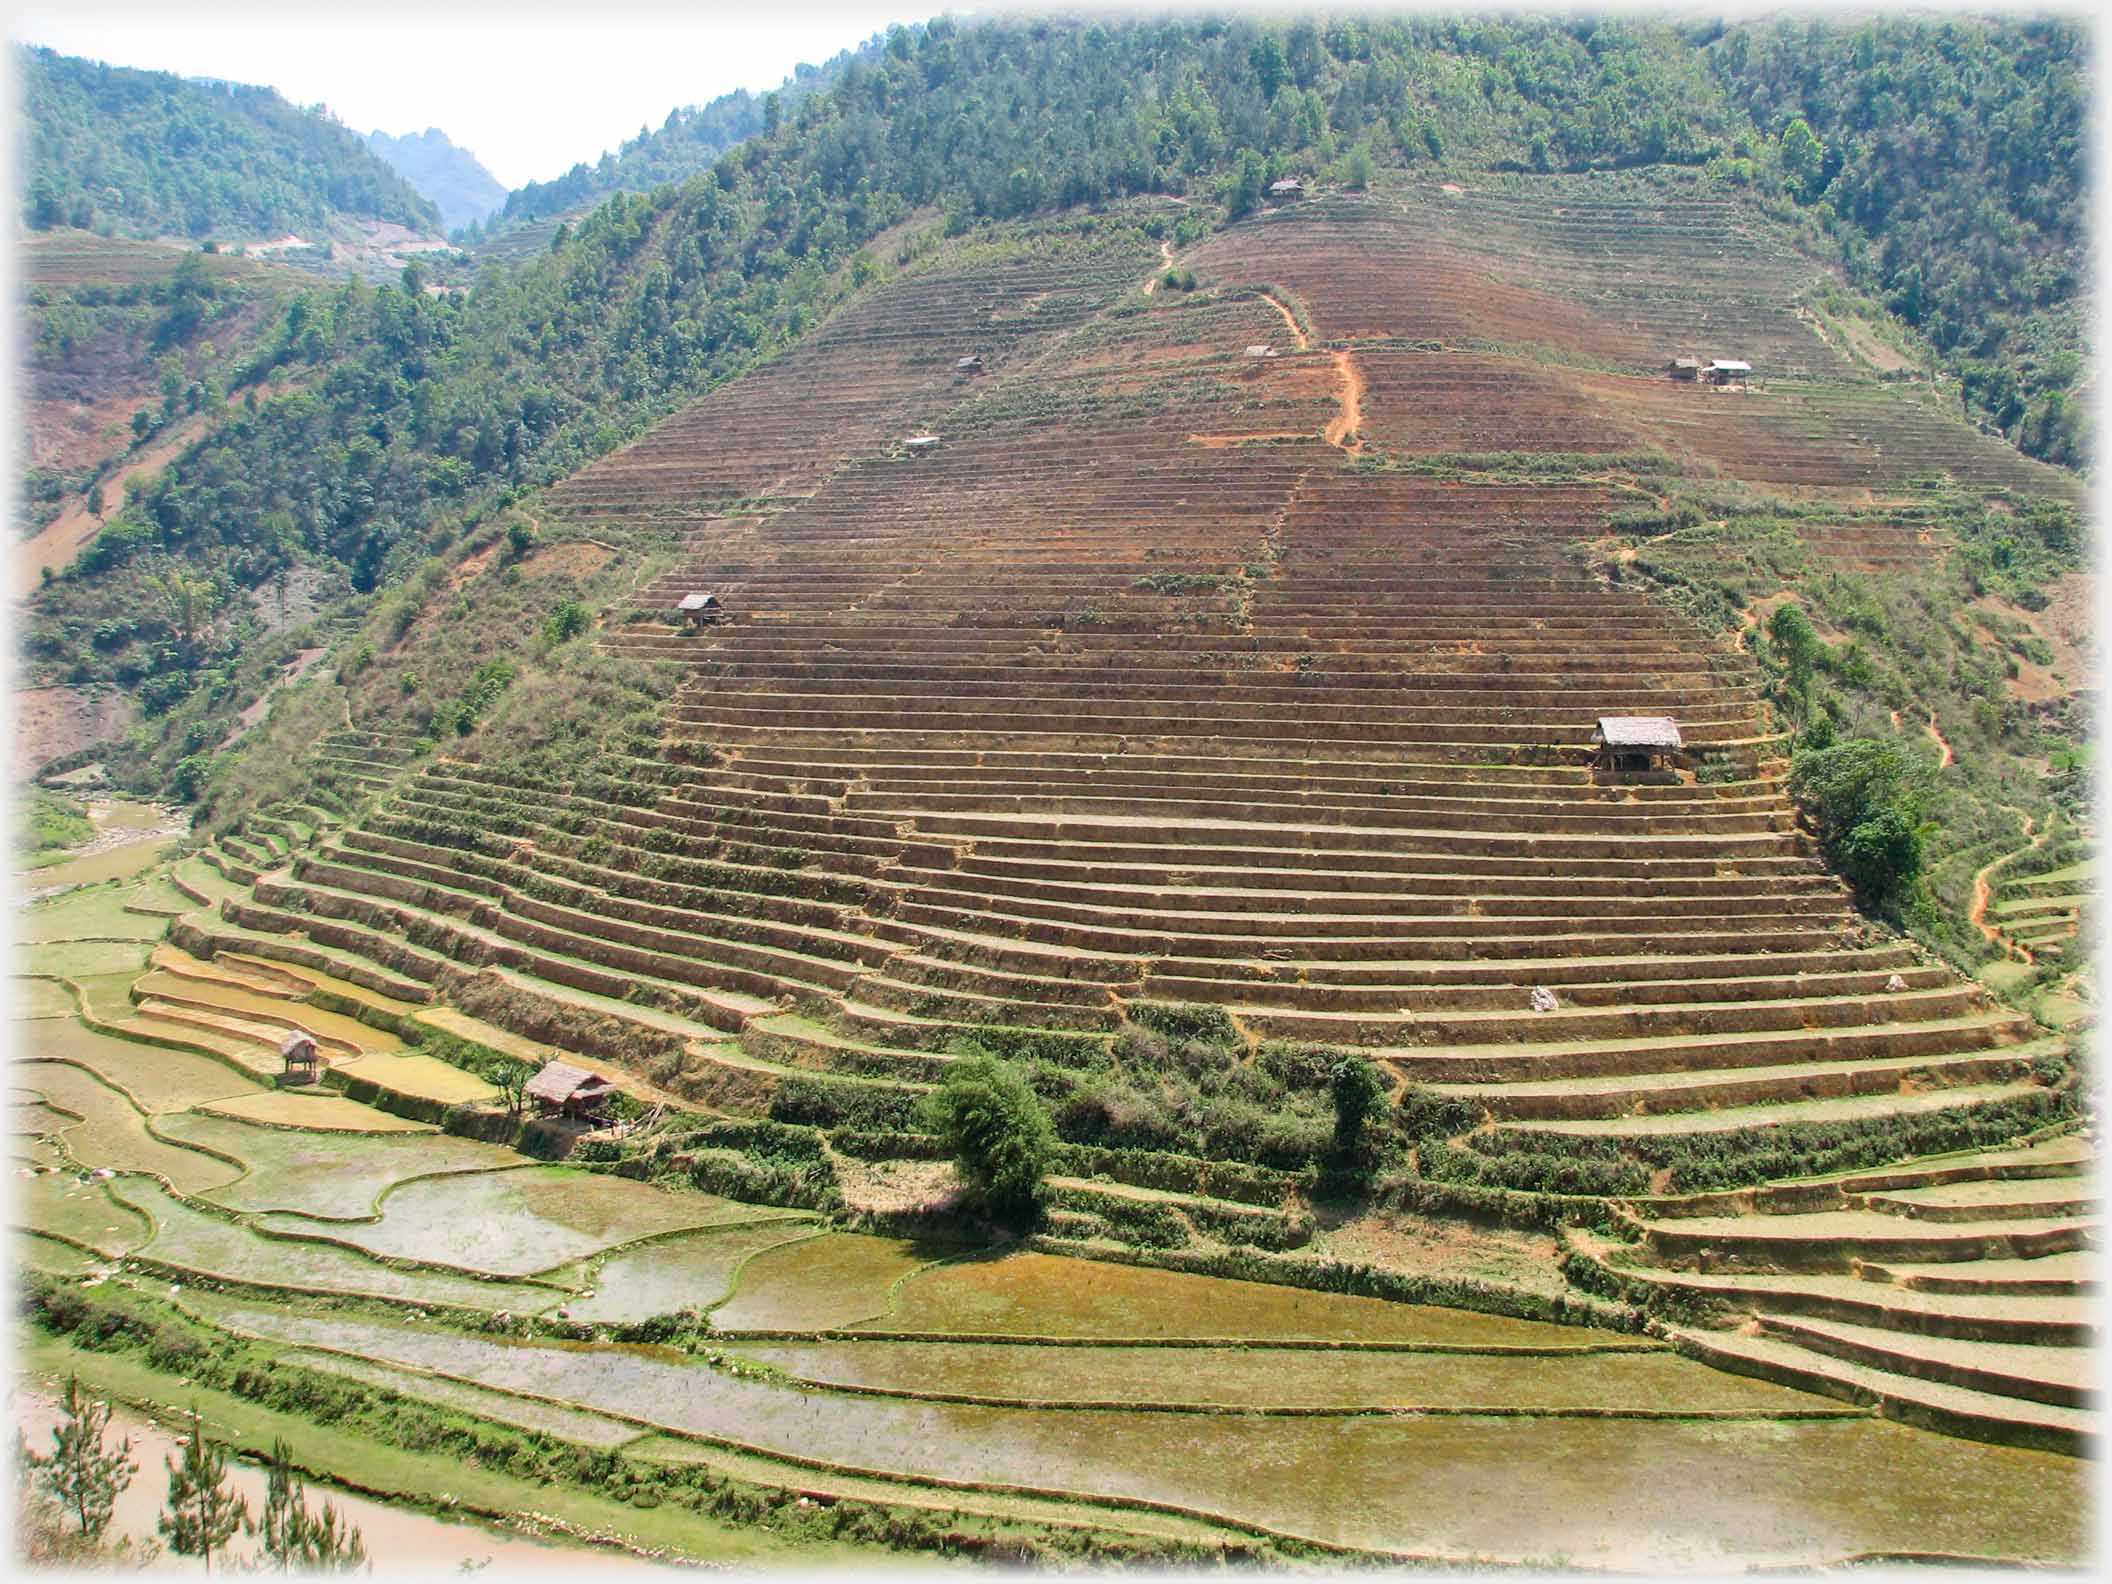 Terraces running down to flatter land and fields at their base.